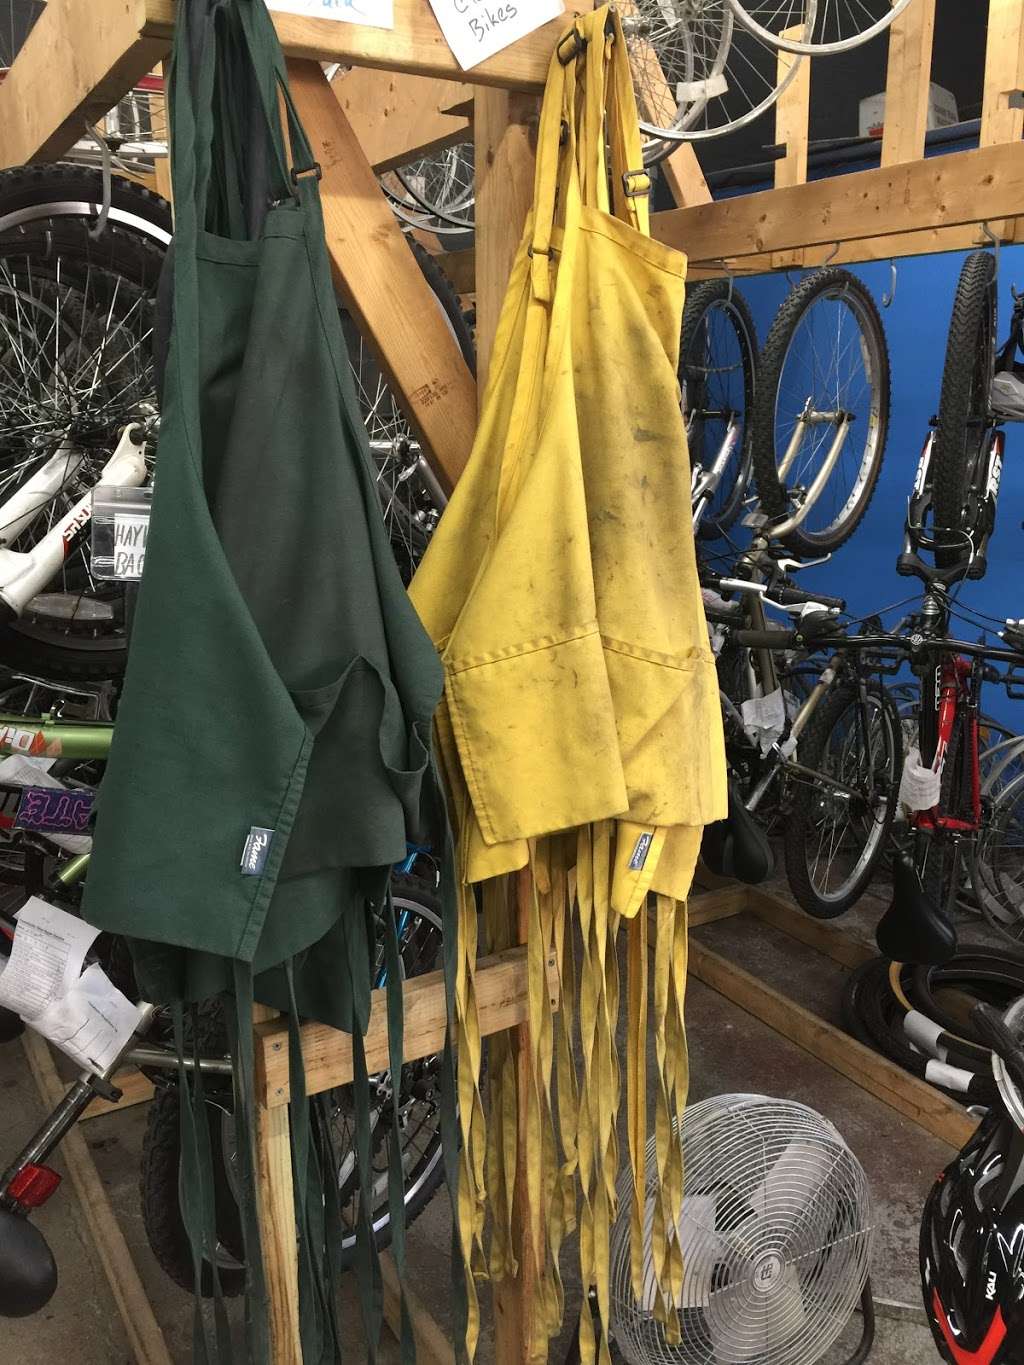 Freewheelin Bikes (T-F 12-6, Sat 10-6) | 3355 Central Ave, Indianapolis, IN 46205 | Phone: (317) 926-5440